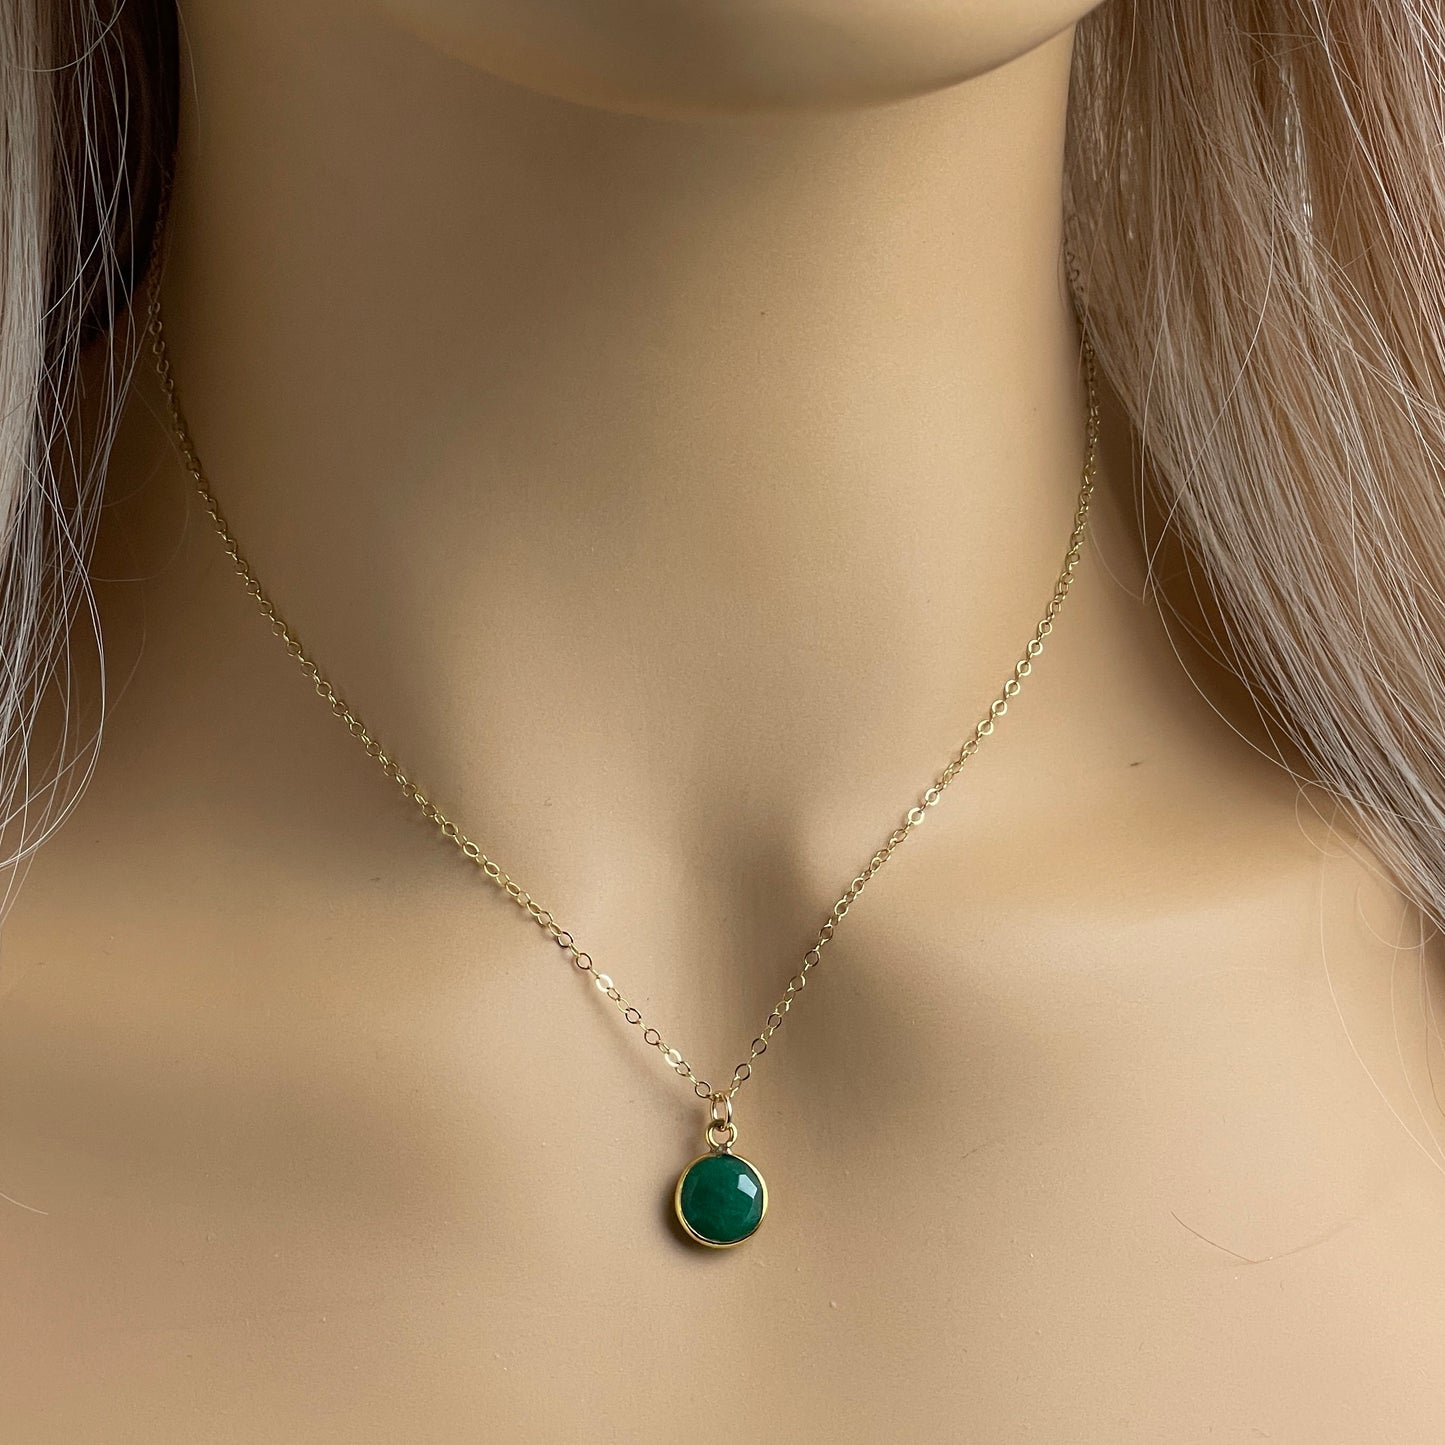 Raw Emerald Necklace - Small Emerald Pendant Necklace